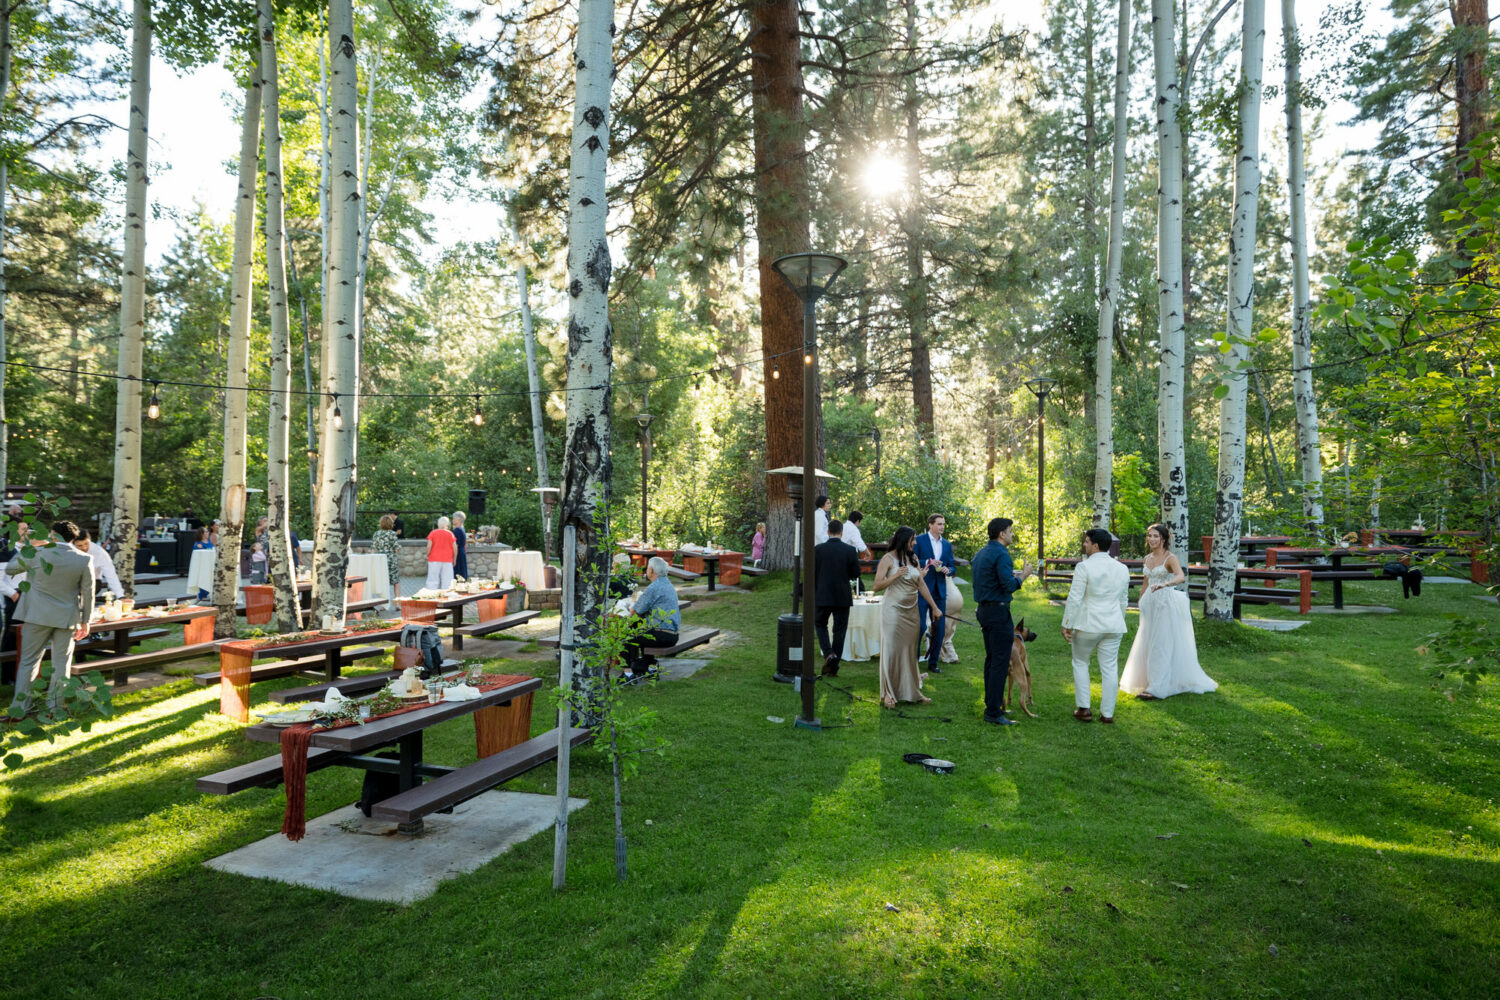 Aspen Grove is a beautiful forested summer wedding venue in North Lake Tahoe featuring picnic tables on a large grassy lawn.